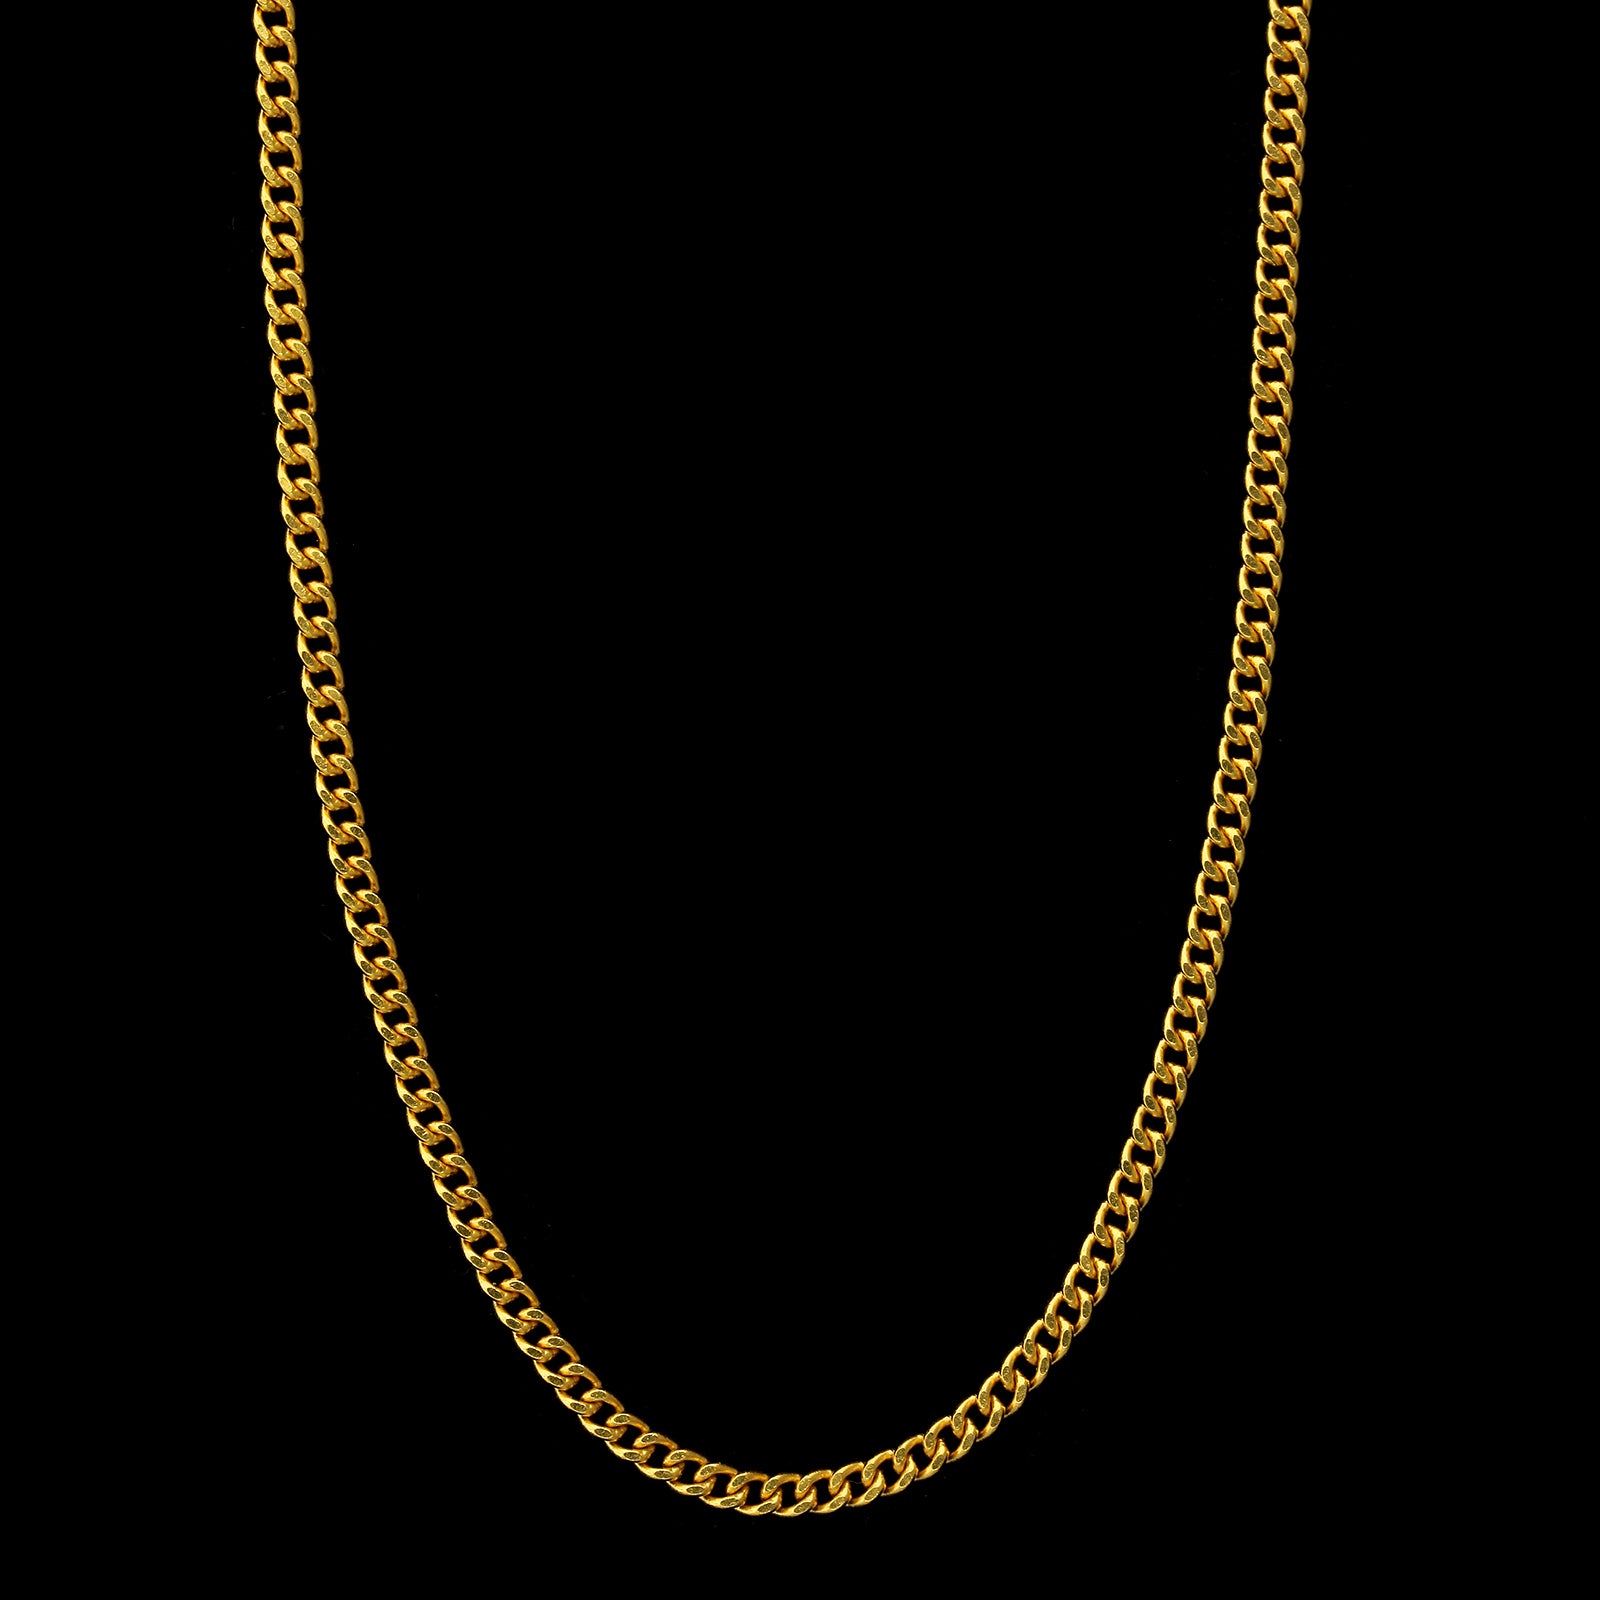 24K Yellow Gold Estate Curb Link Chain